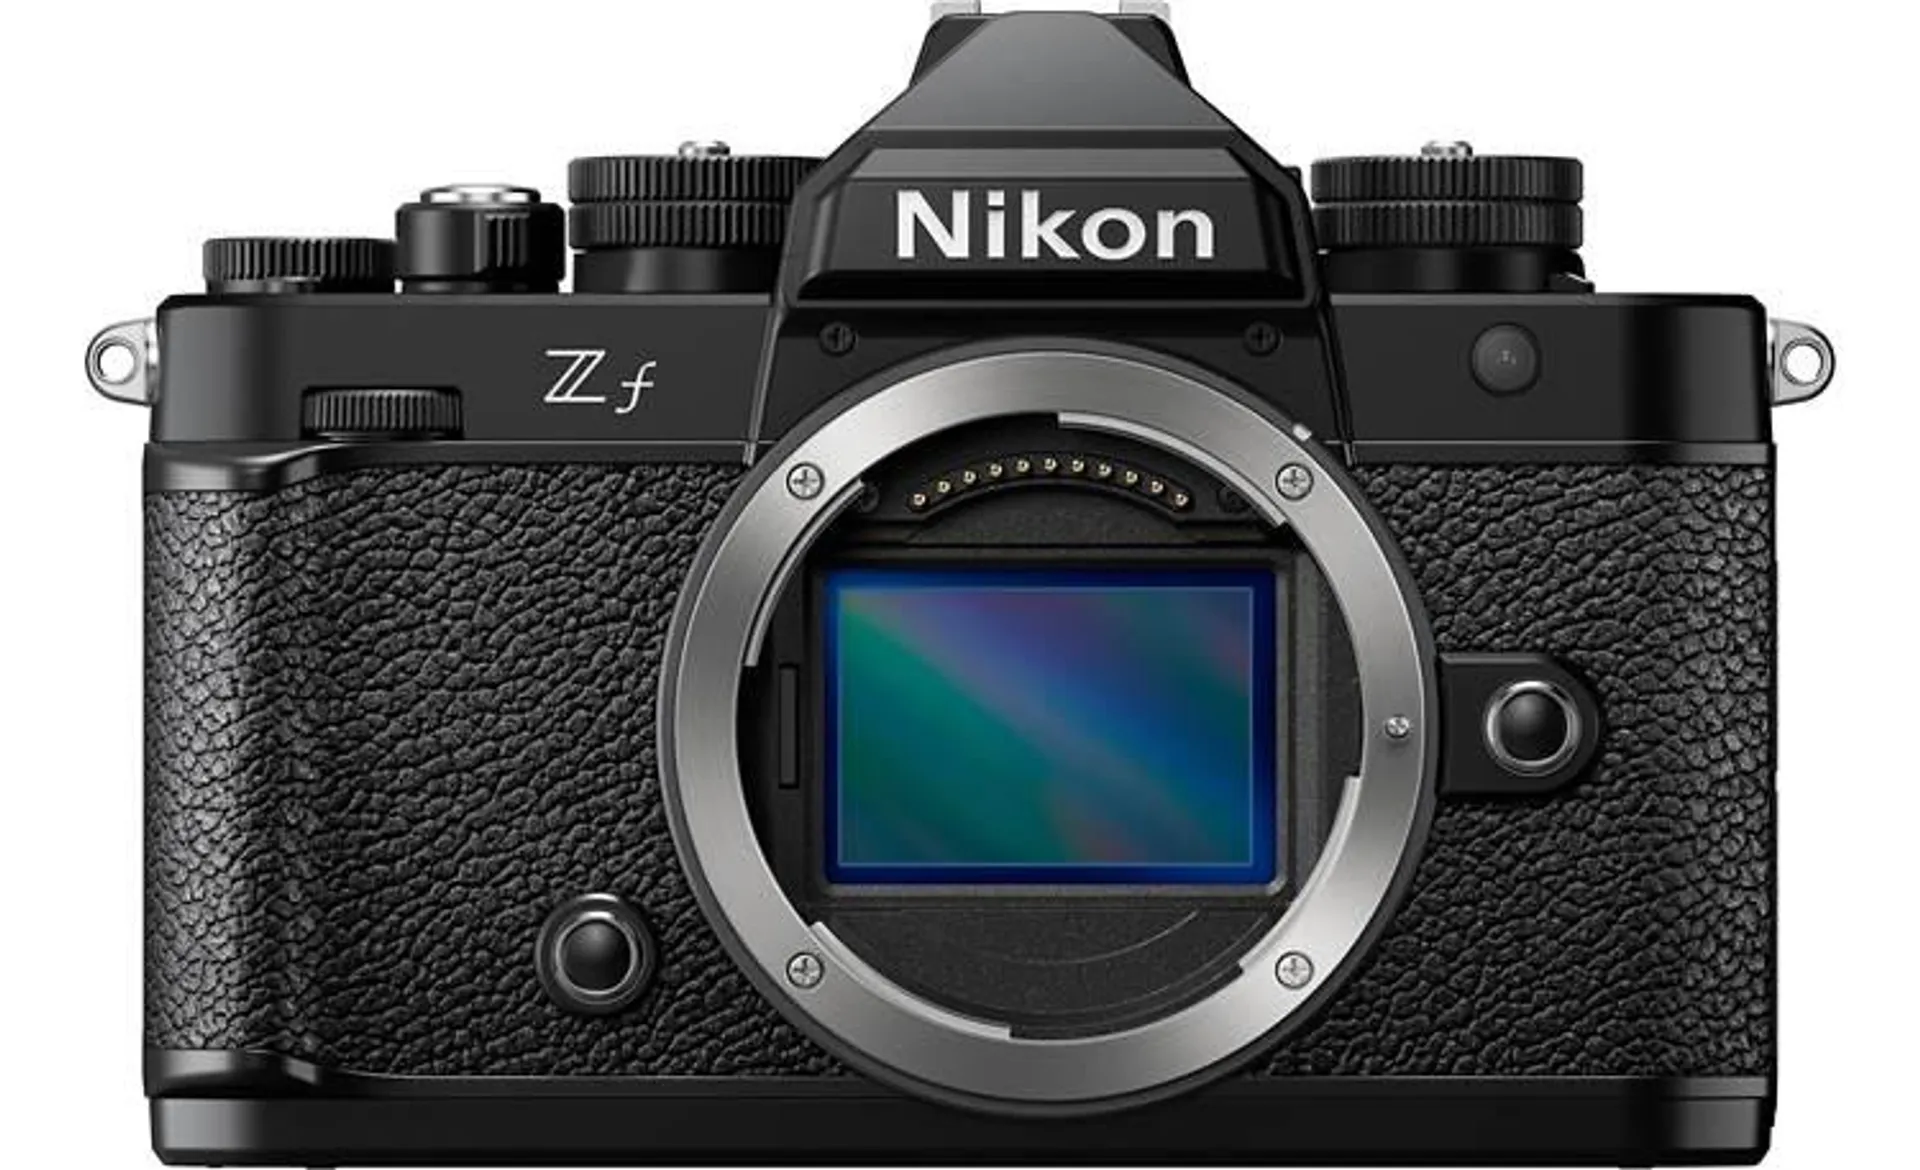 Nikon Z f (no lens included) 24.5-megapixel full-frame retro-styled mirrorless camera with cutting-edge features